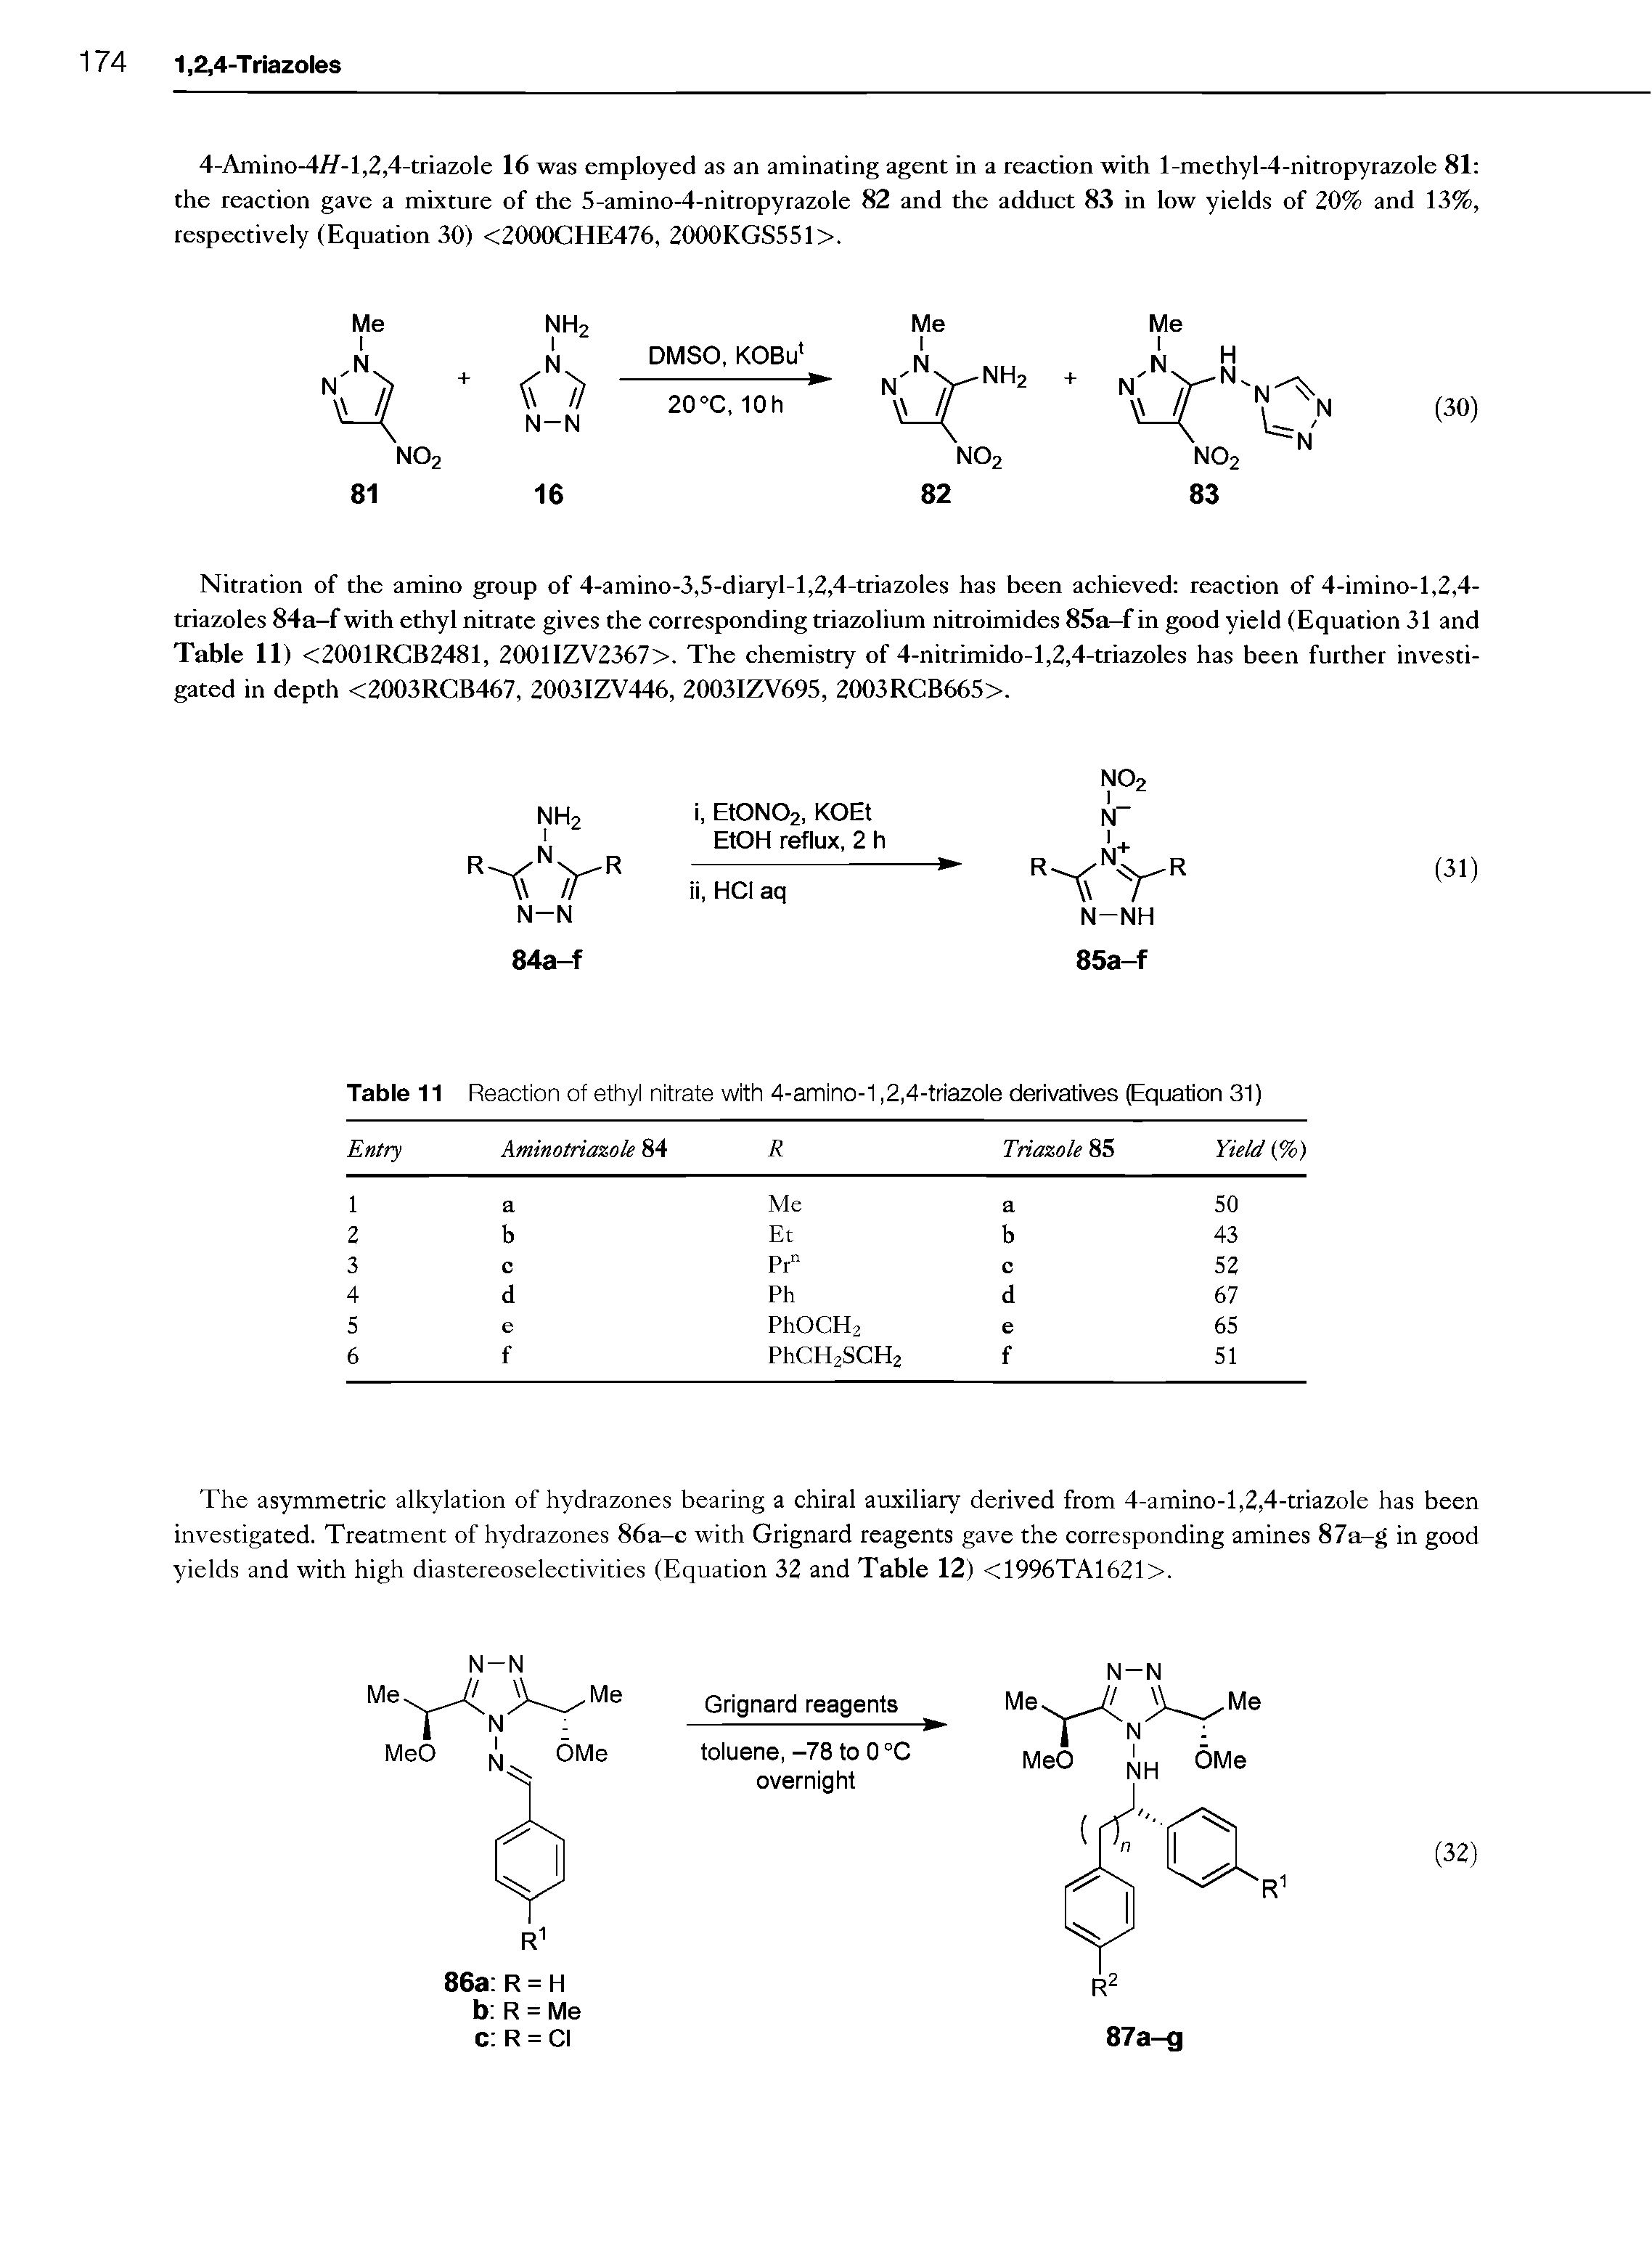 Table 11 Reaction of ethyl nitrate with 4-amino-1,2,4-triazole derivatives (Equation 31)...